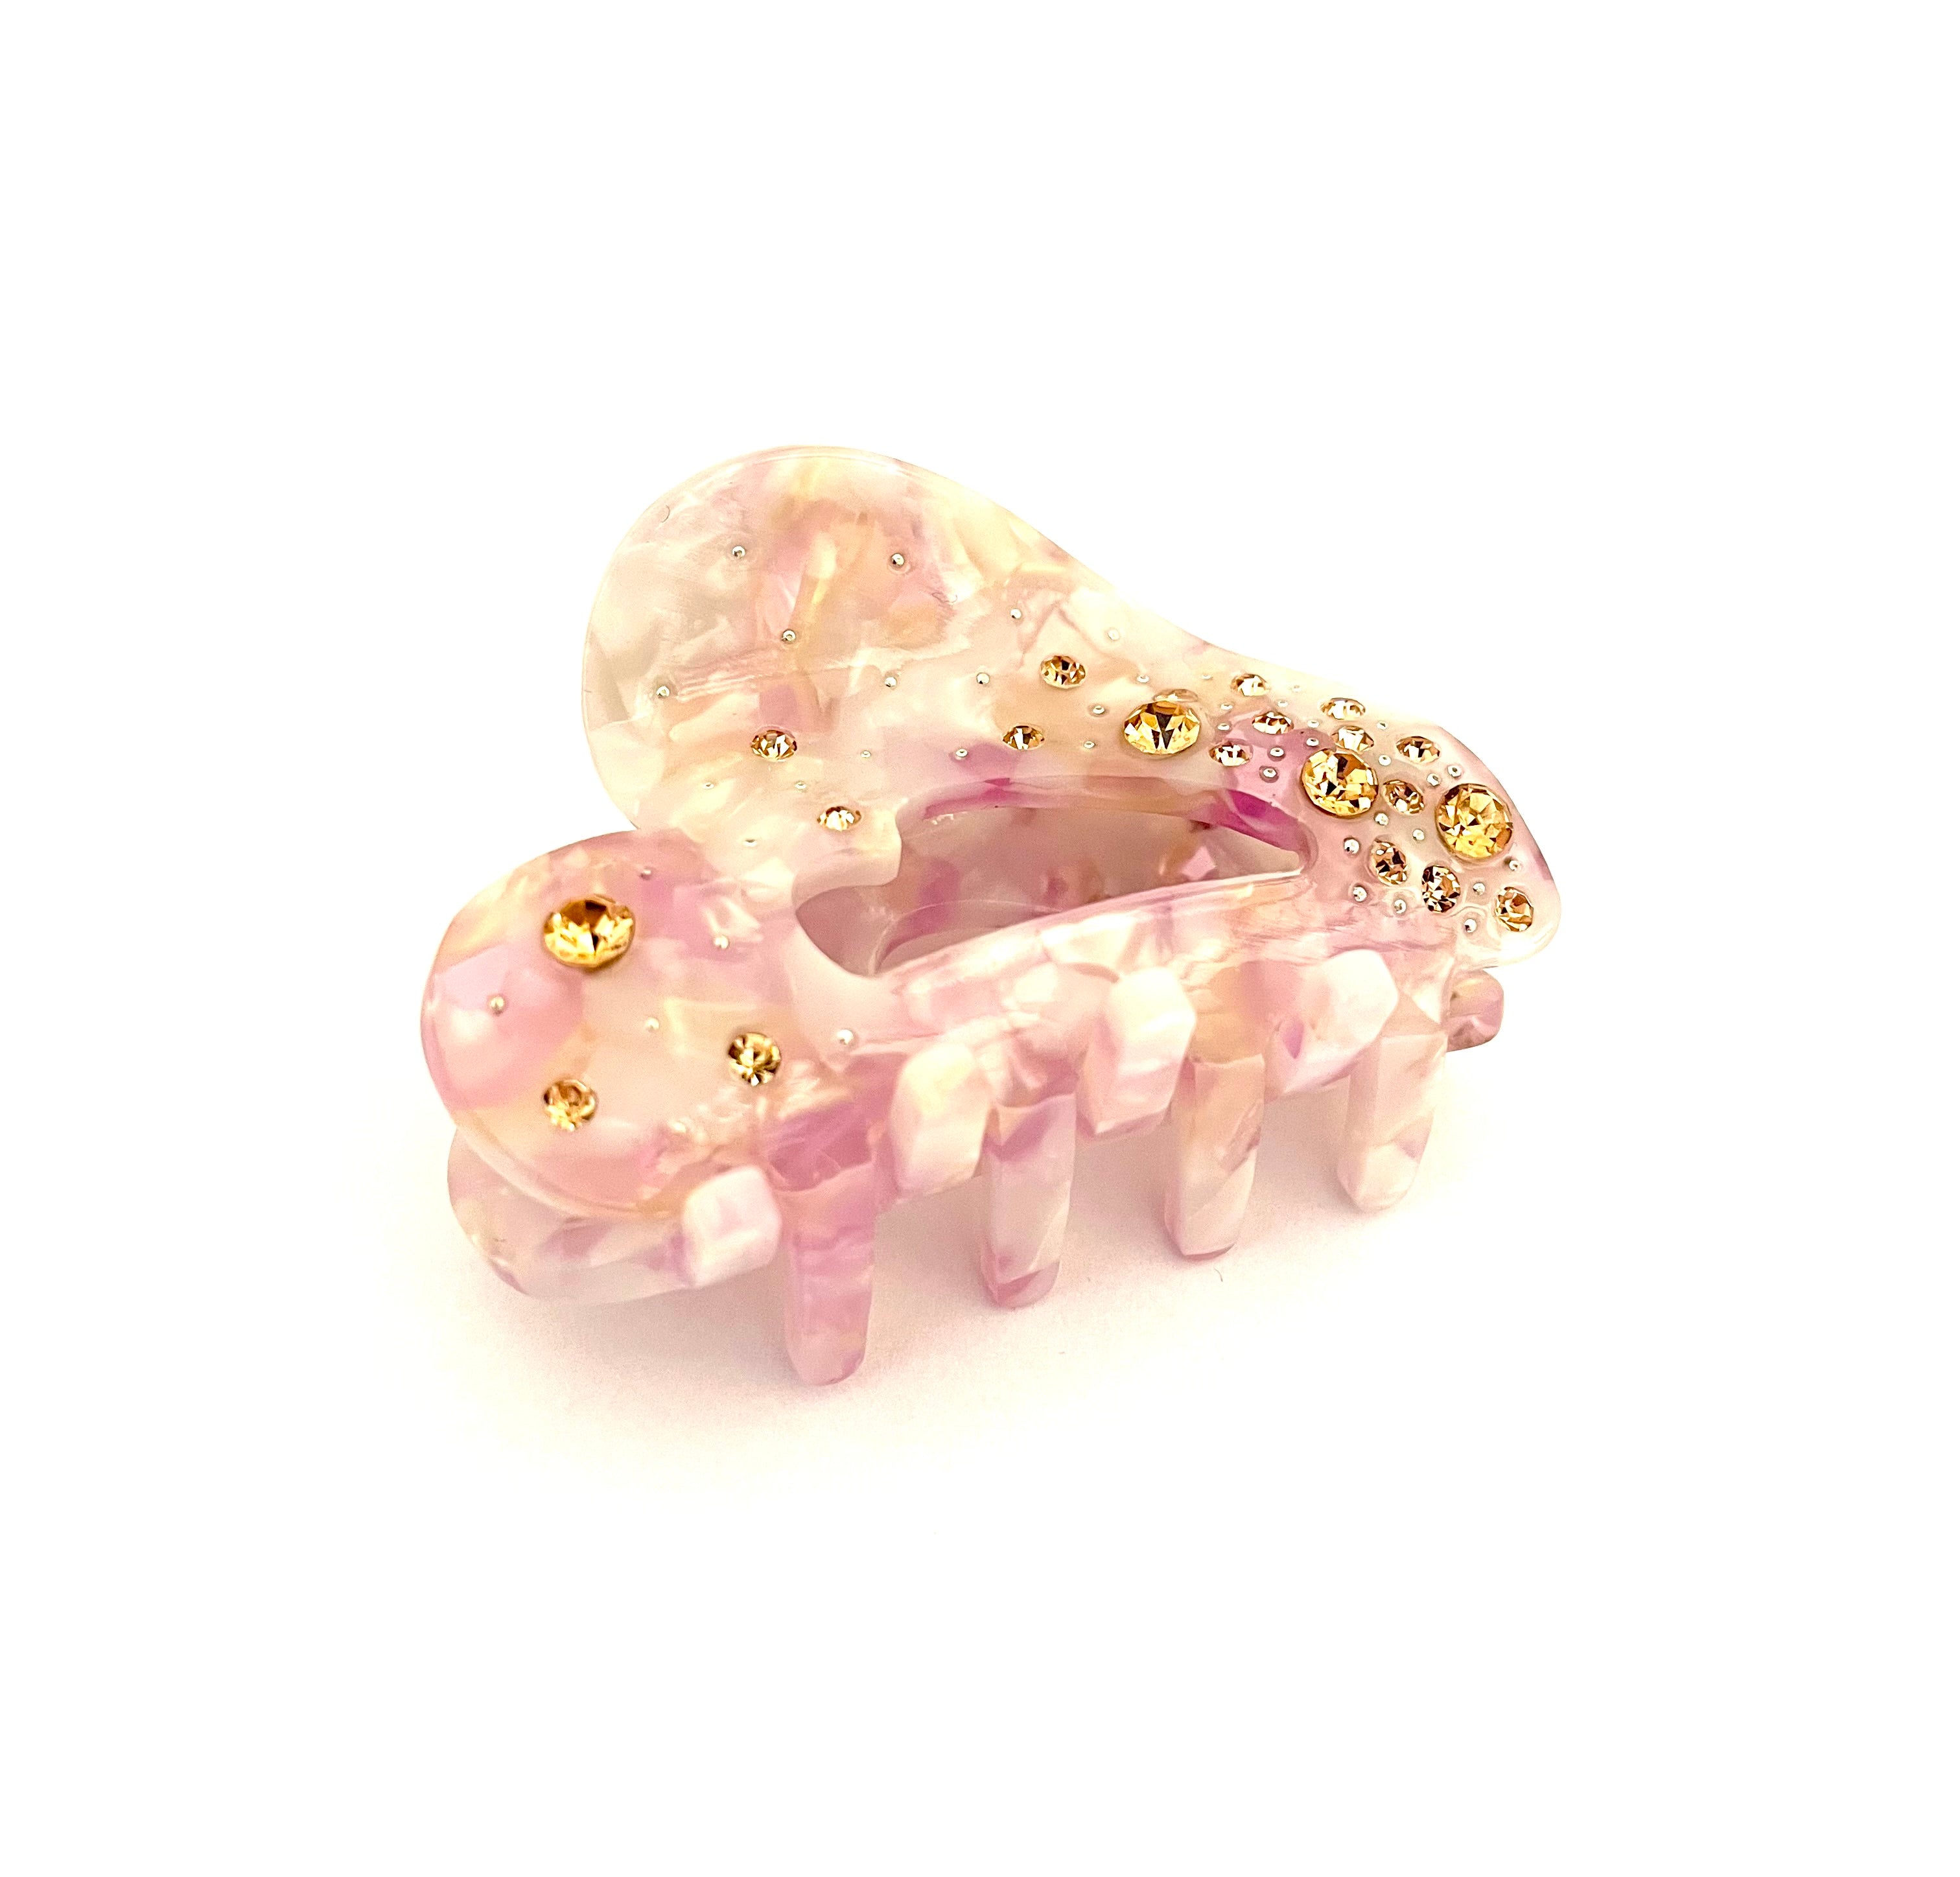 Baby Simi Heart Hairclip - White / Pink Marble